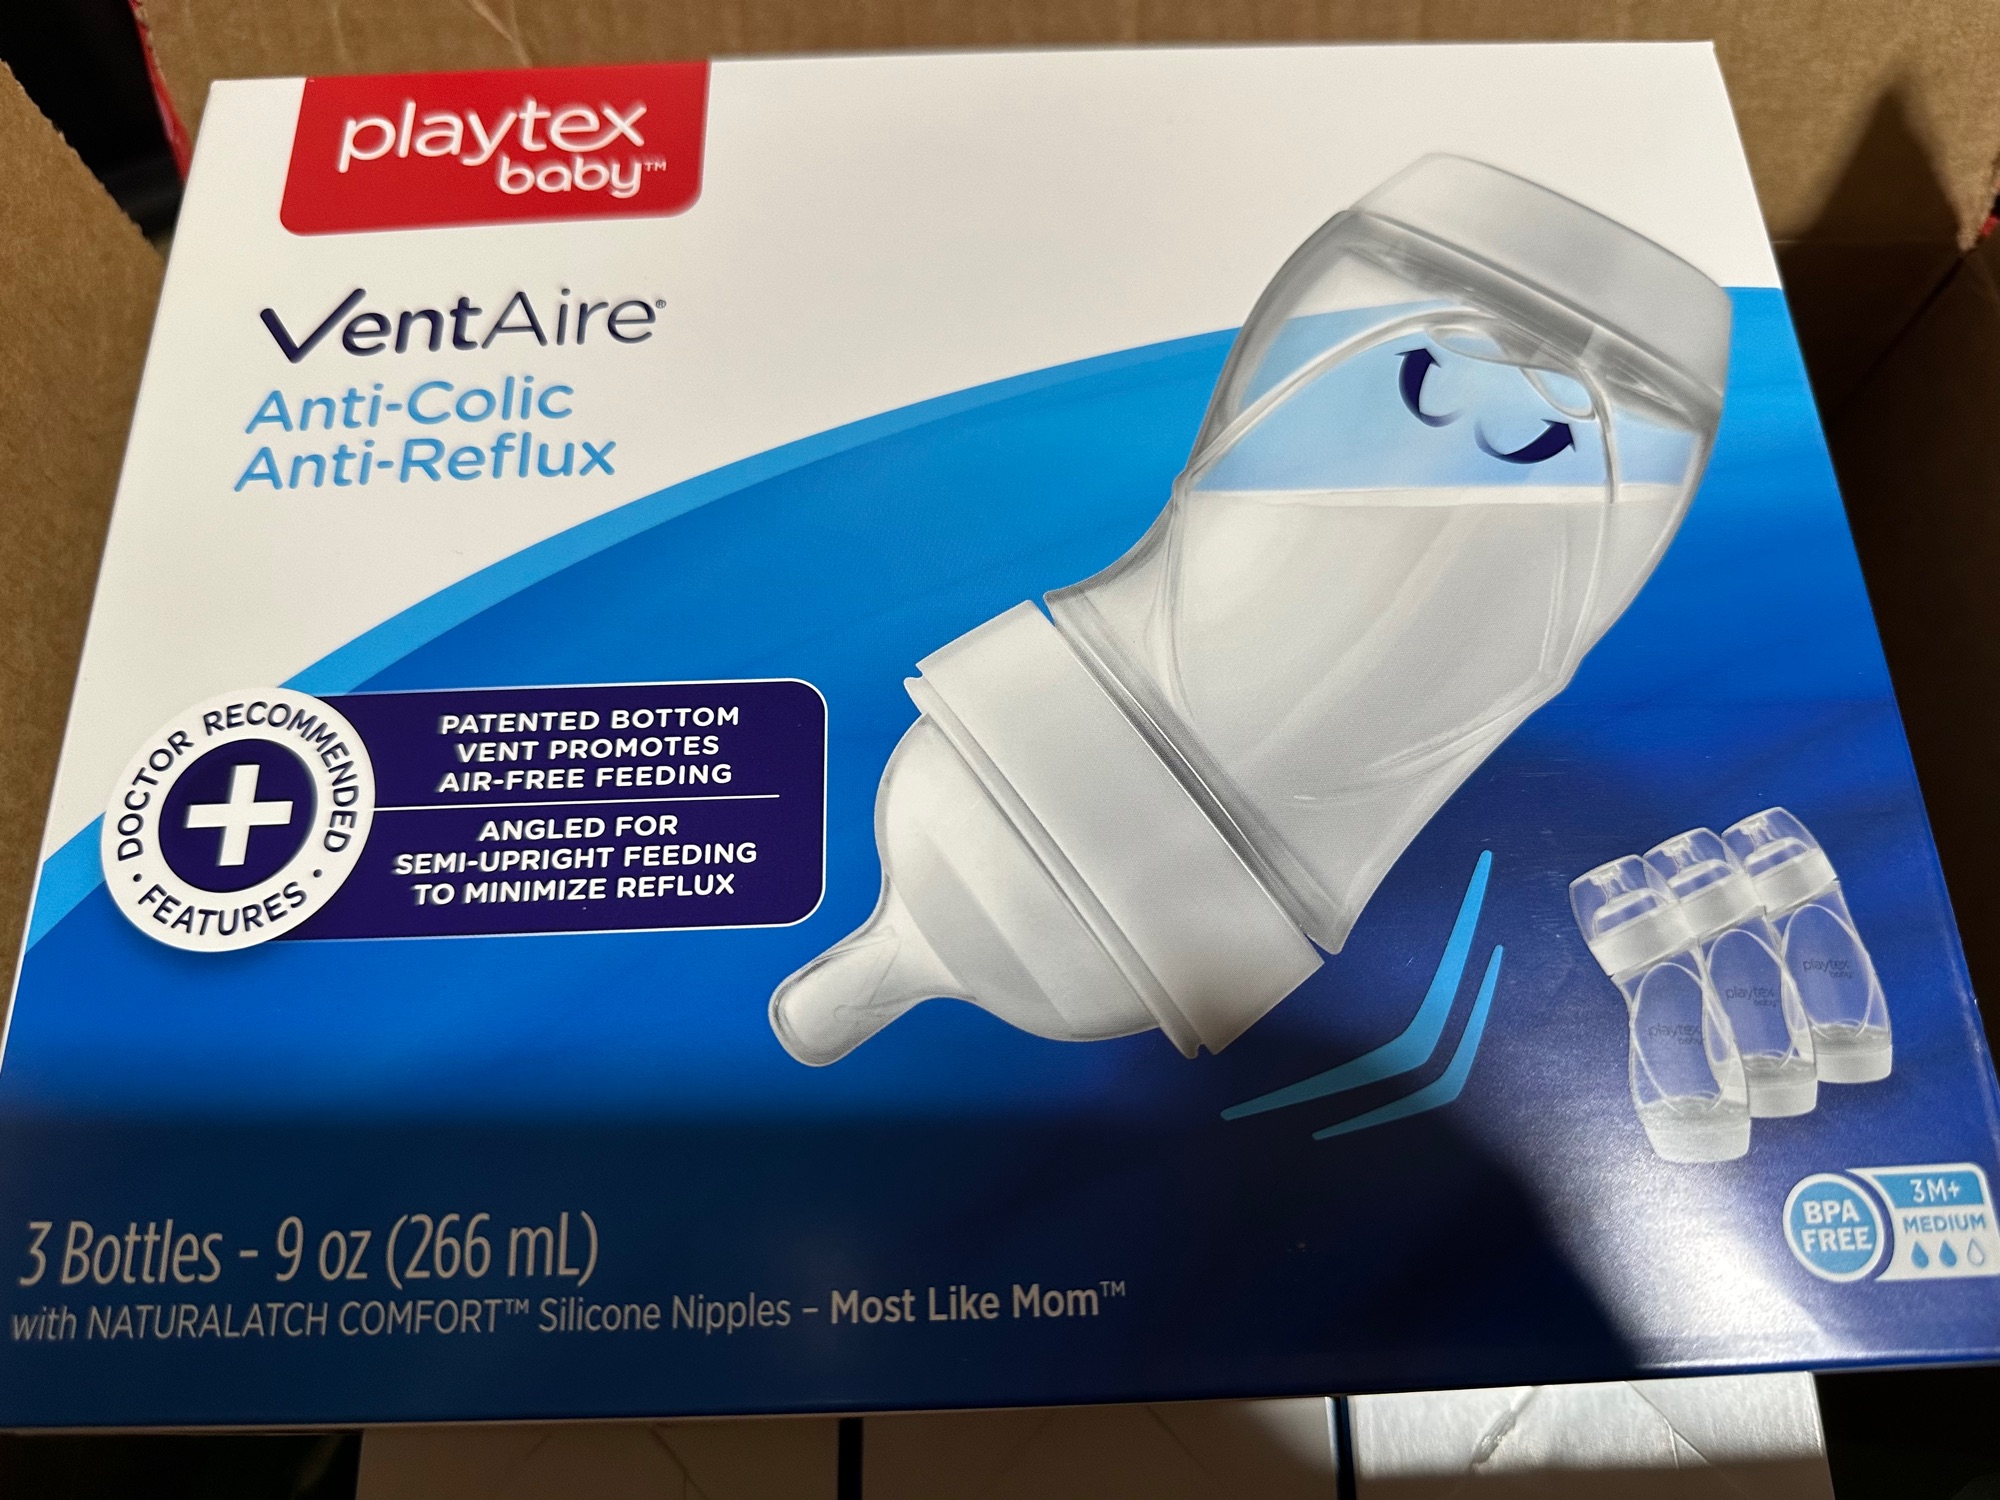  Playtex Baby VentAire Bottle, Helps Prevent Colic and Reflux,  6 Ounce Bottles, 3 Count : Baby Bottles : Baby